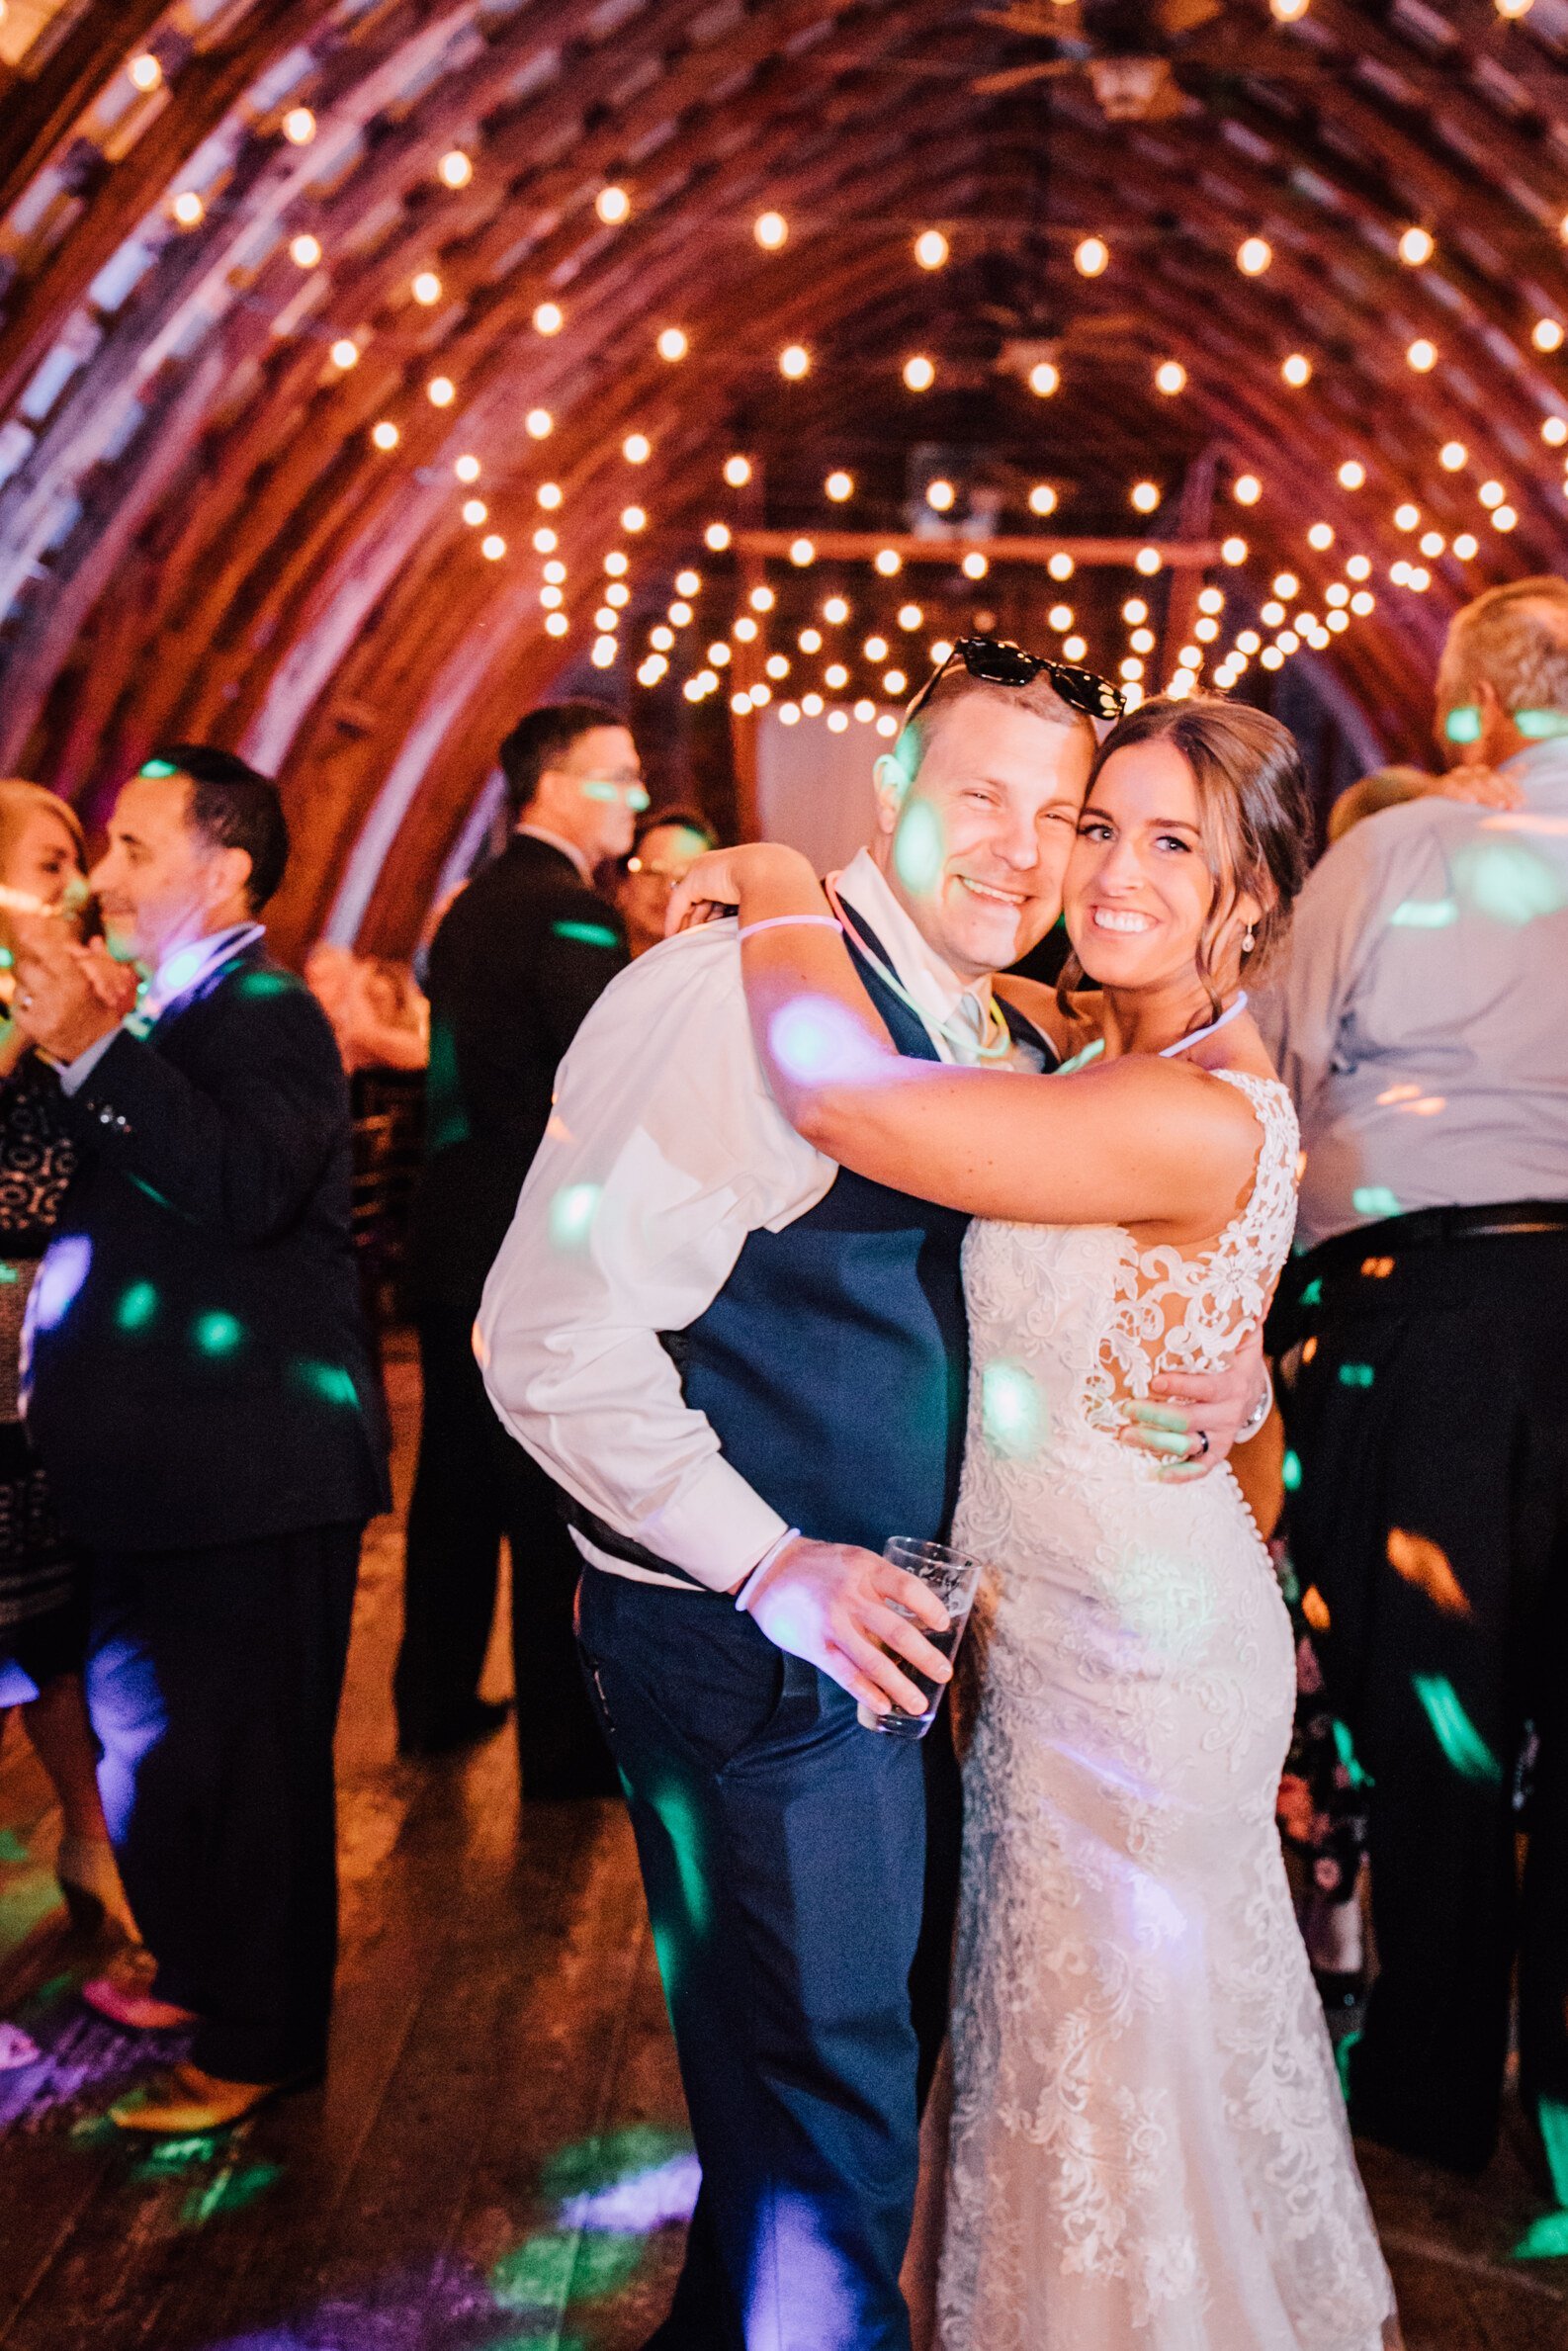  The bride and groom smile from the dance floor of their hayloft on the arch wedding reception 